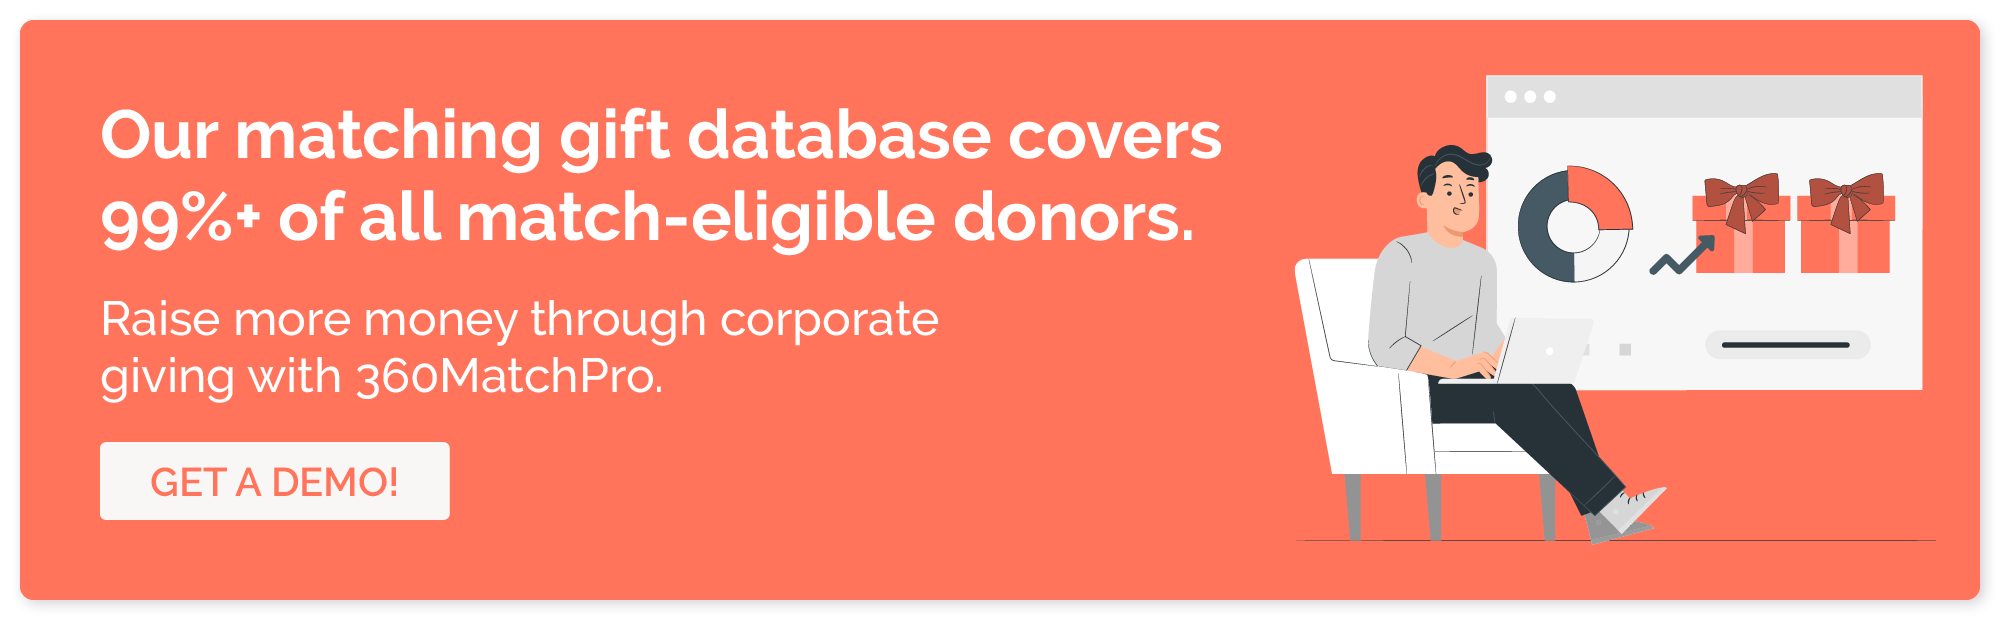 Get a free demo of our CSR database to find matching gift and volunteer grant companies.